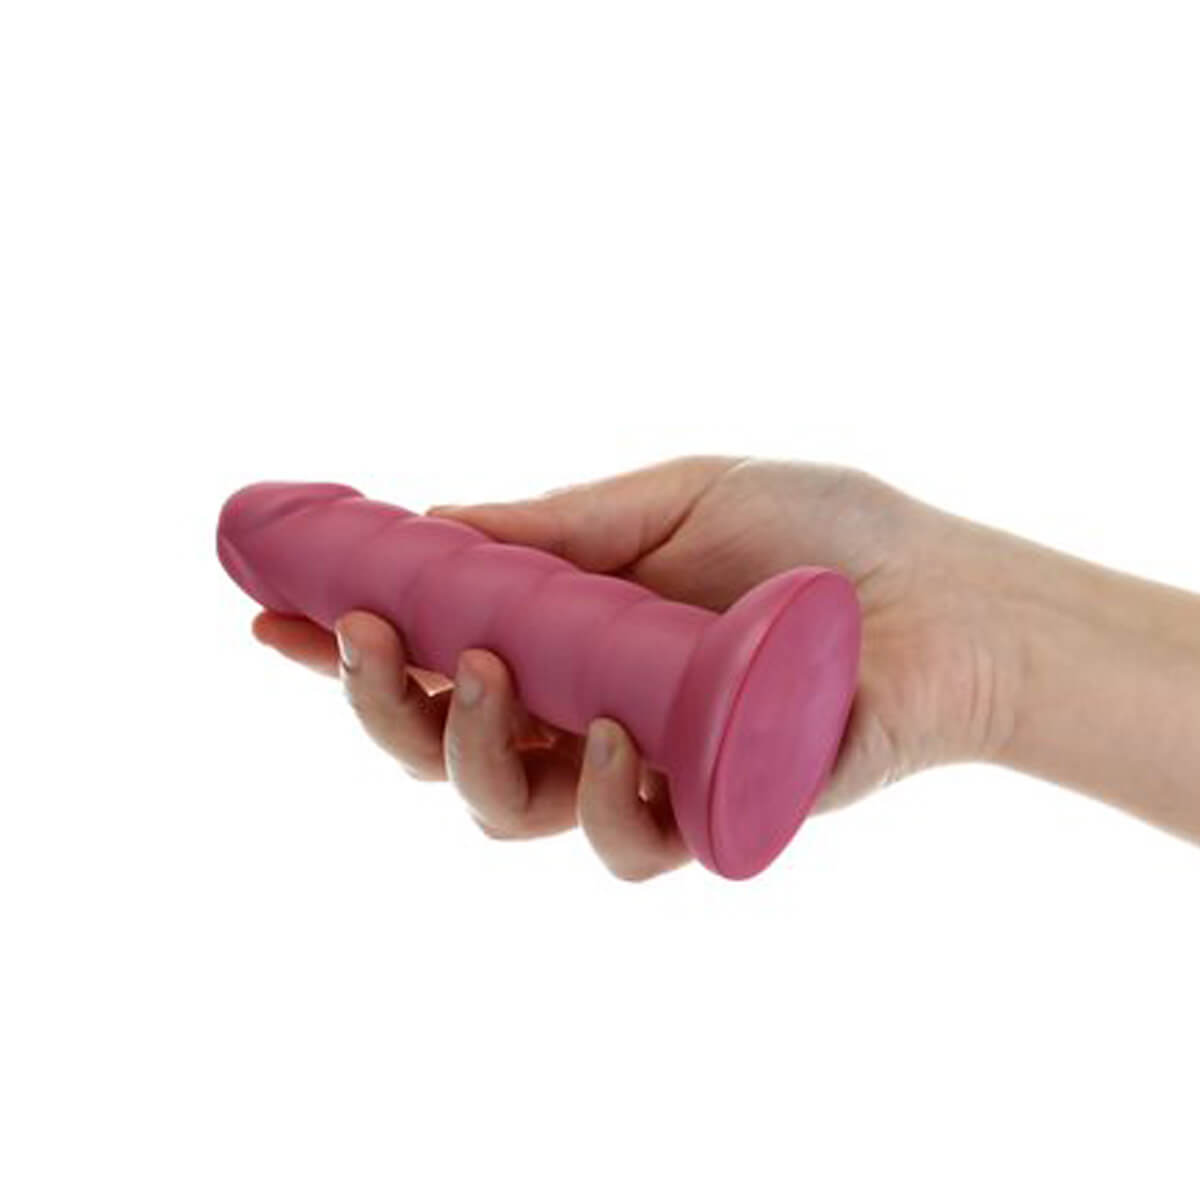 Hand holding a small pink dildo with ribbed texture and suction cup at the bottom Nudie Co